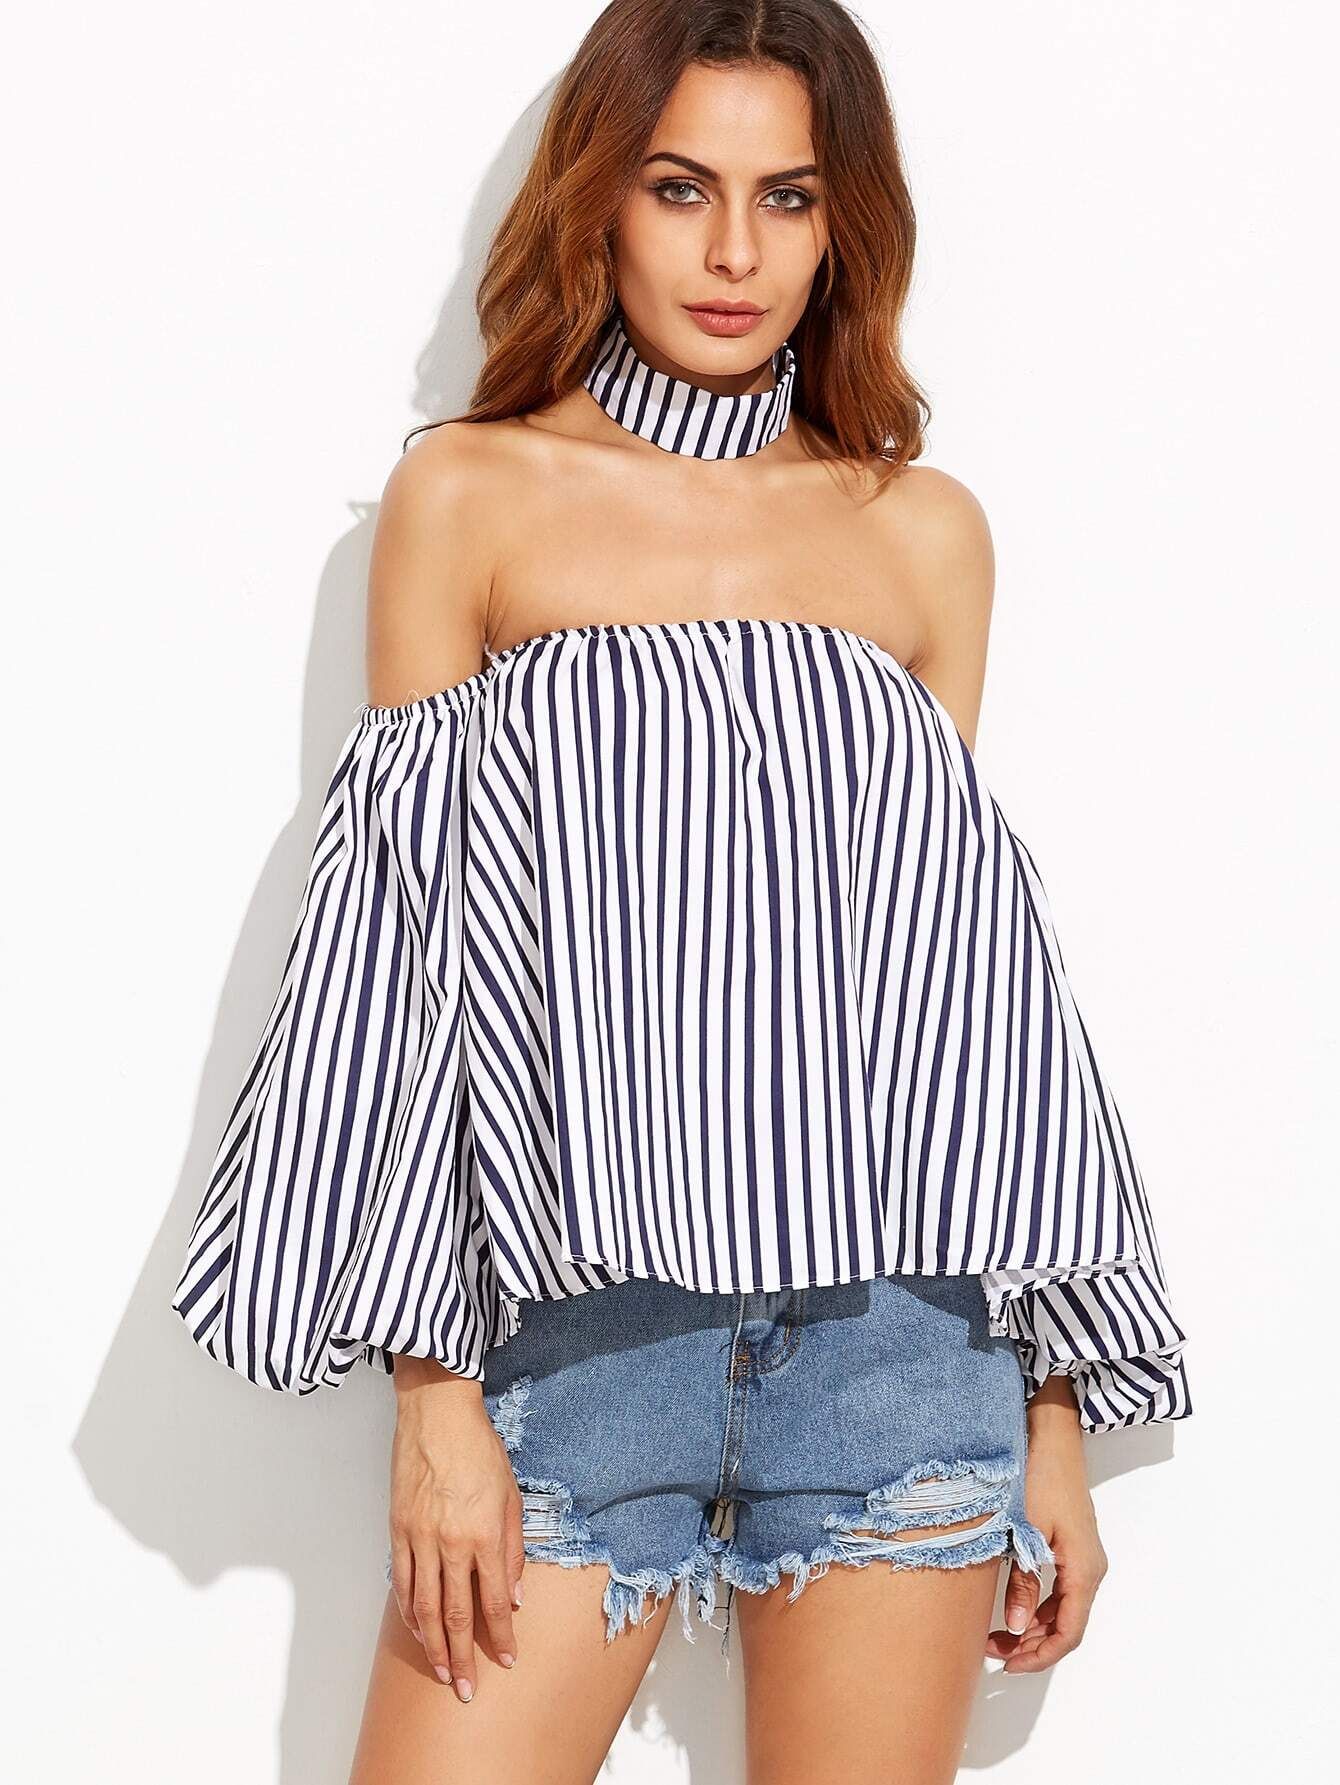 Vertical Striped Off The Shoulder Top With Choker | SHEIN